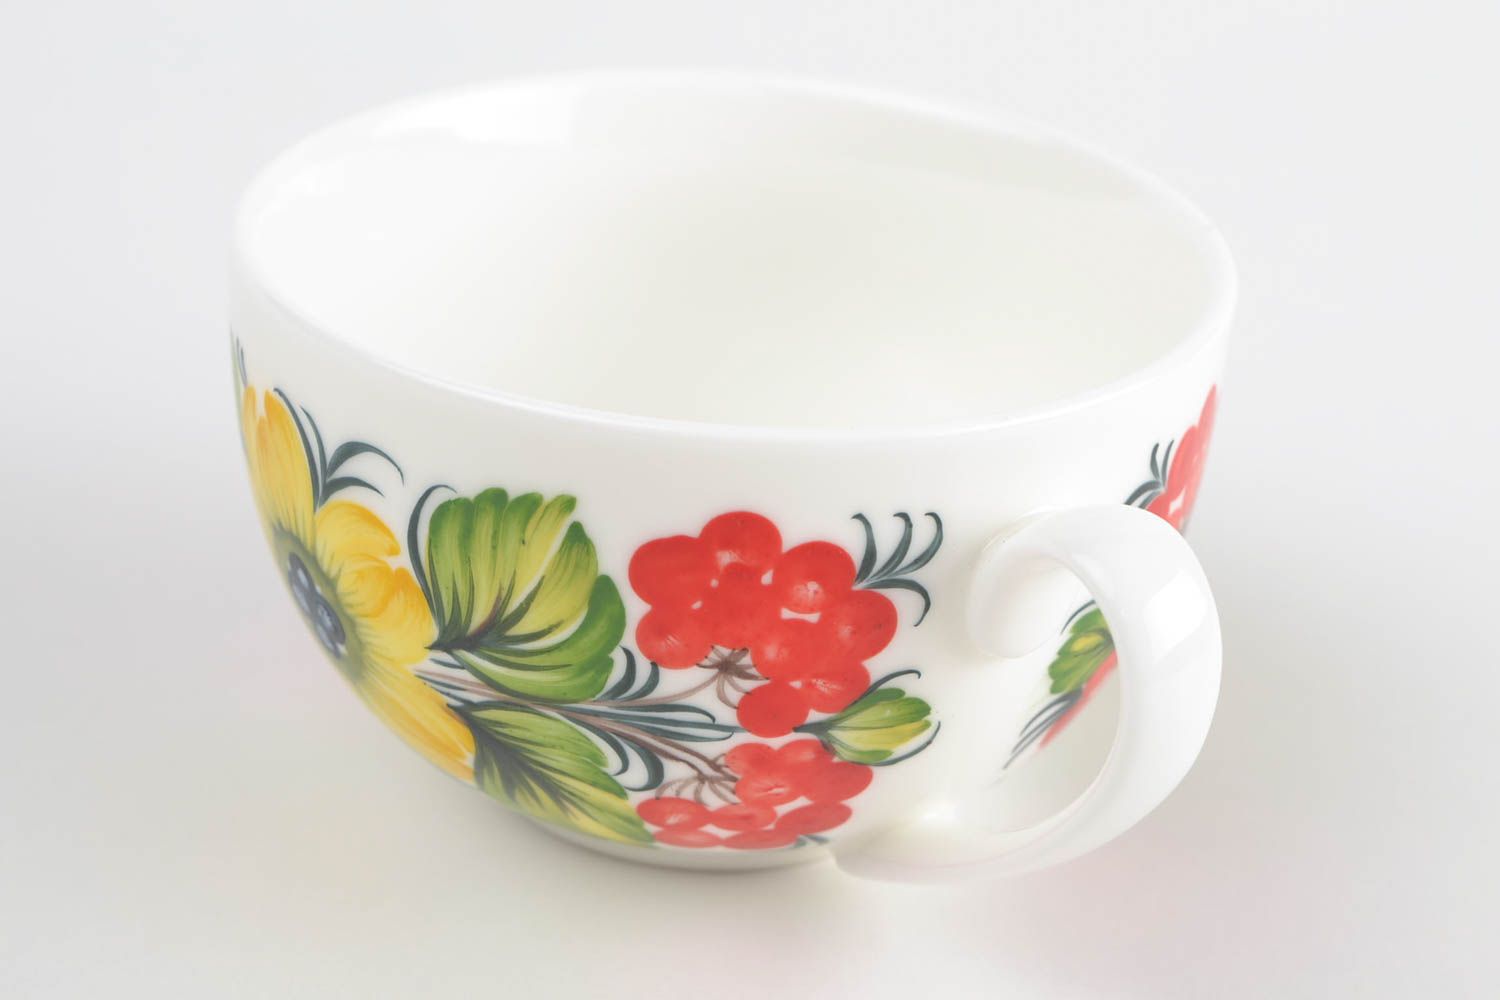 8,5 oz ceramic porcelain teacup with handle and floral design in Russian style 0,39 lb photo 4